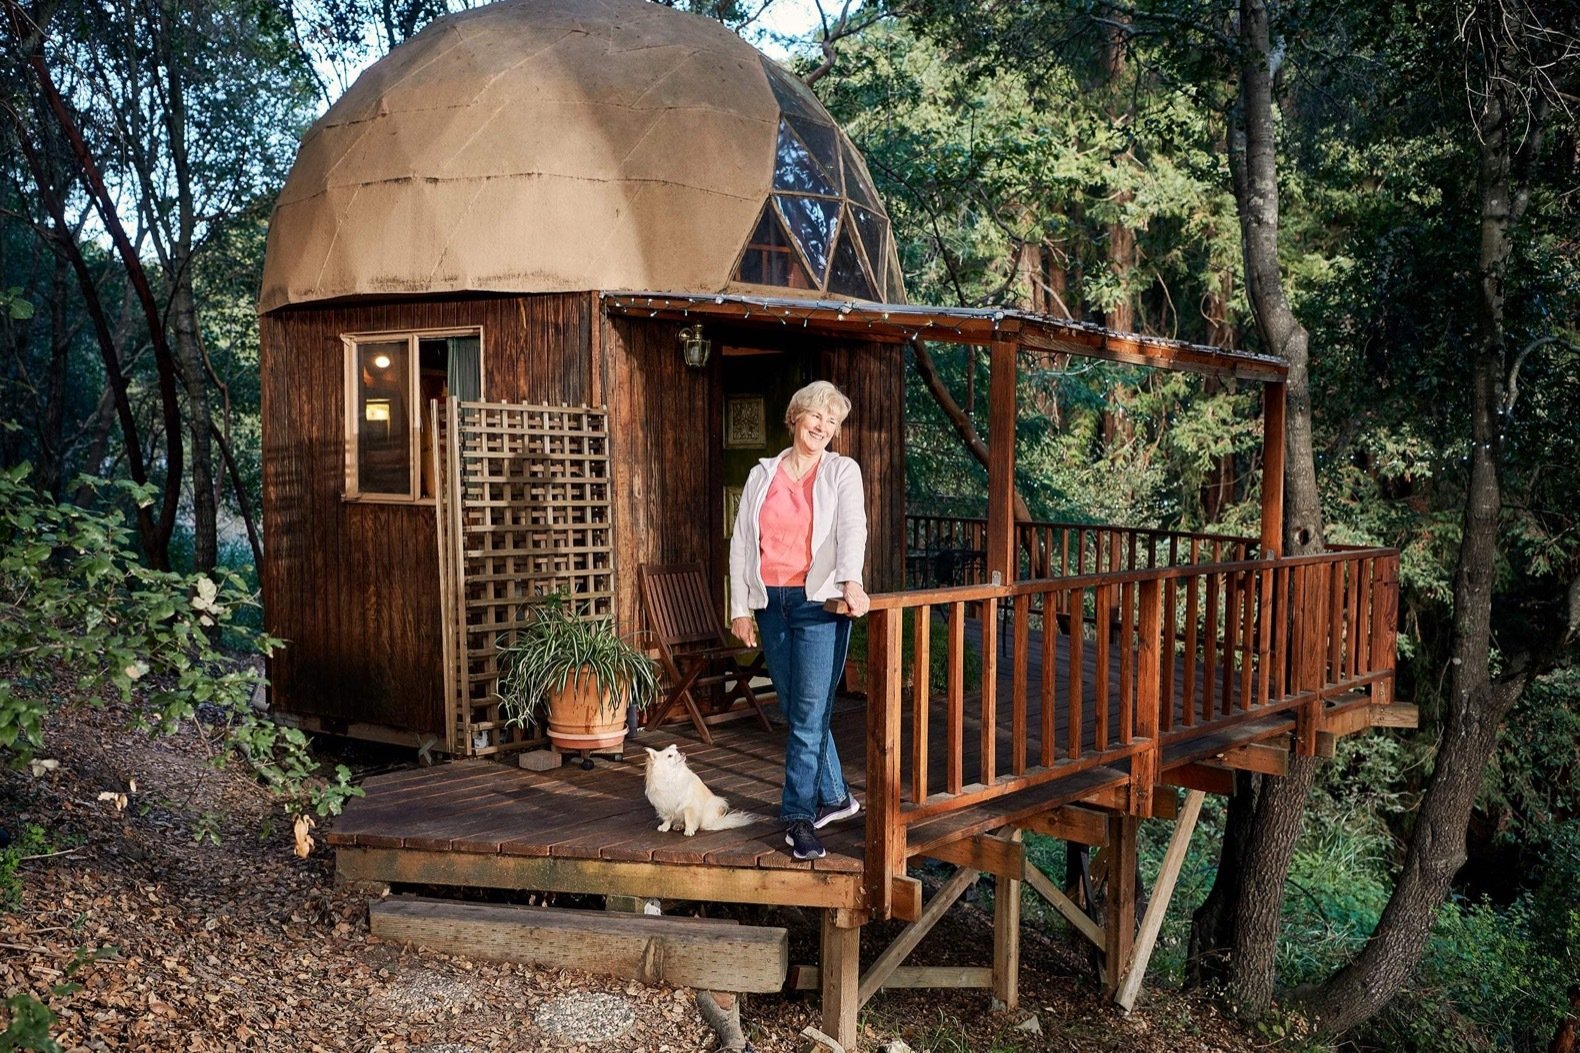 The World’s Most Popular Airbnb Is a Geodesic Cabin in California